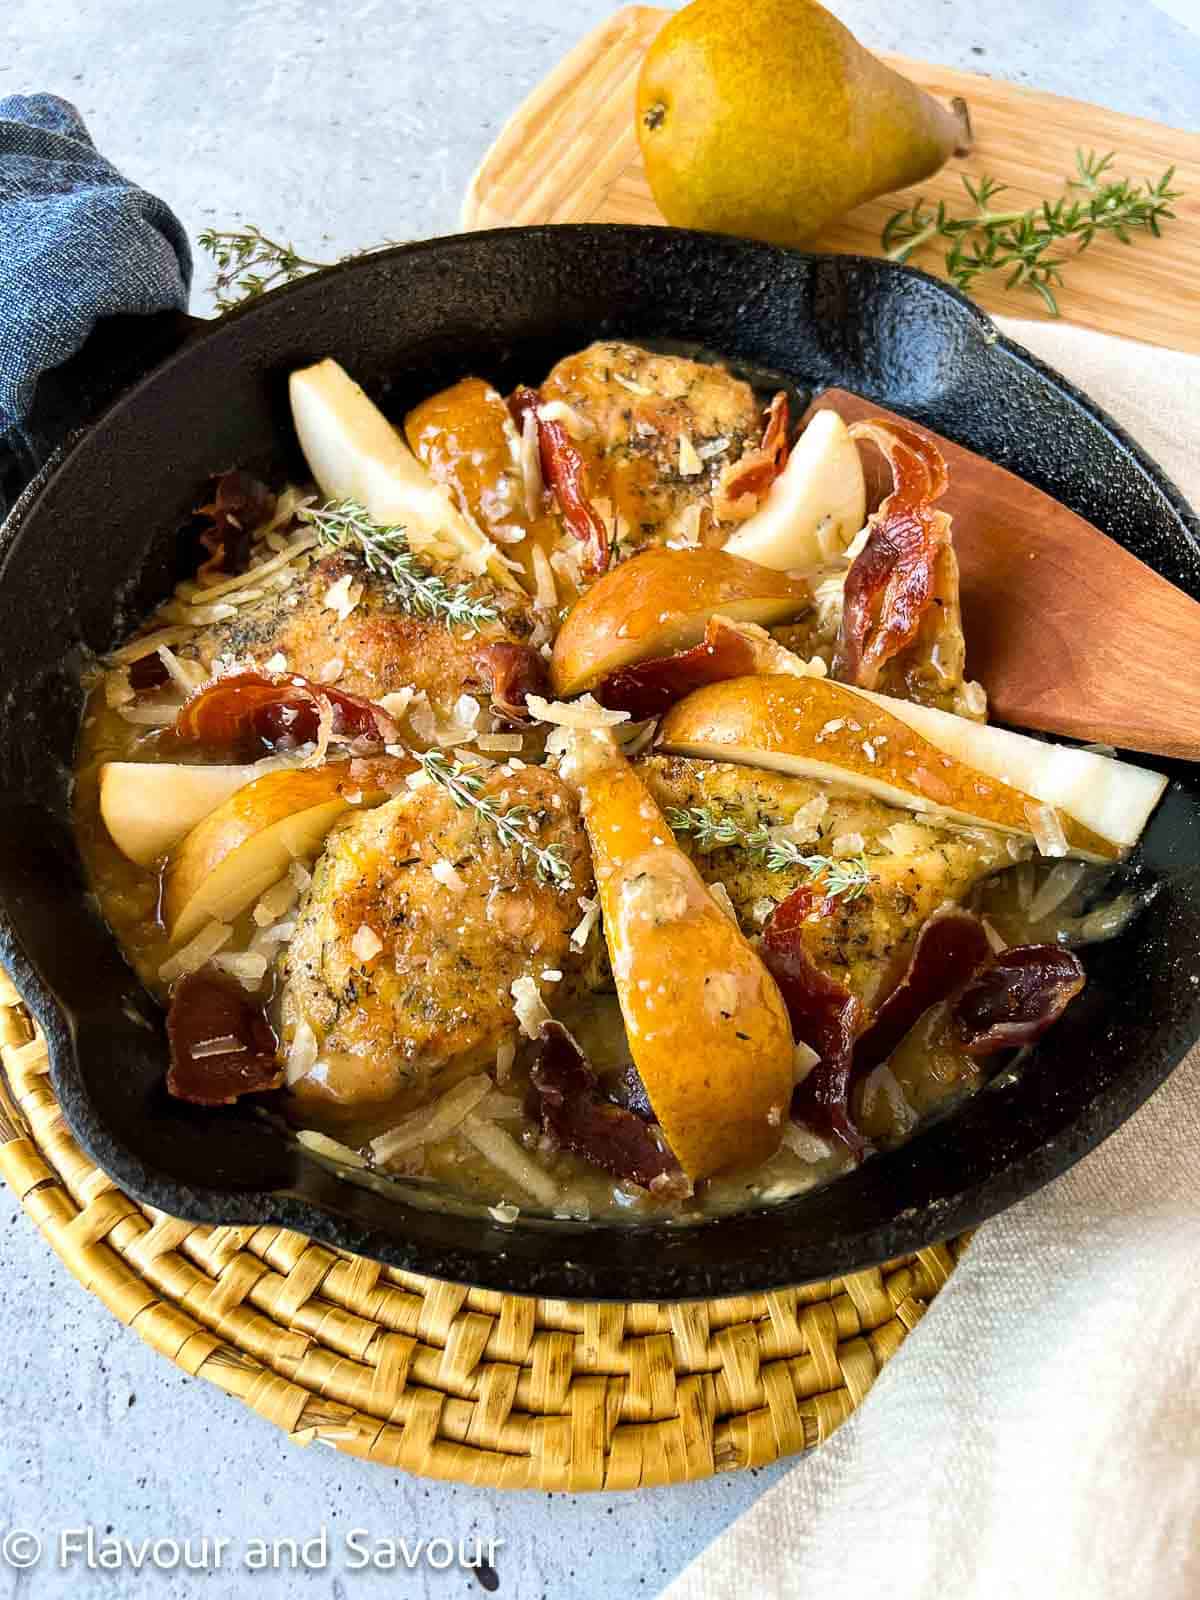 Baked chicken breasts with sliced Bosc pears, small pieces of crisp prosciutto ham, topped with grated Parmigiano Reggiano cheese.